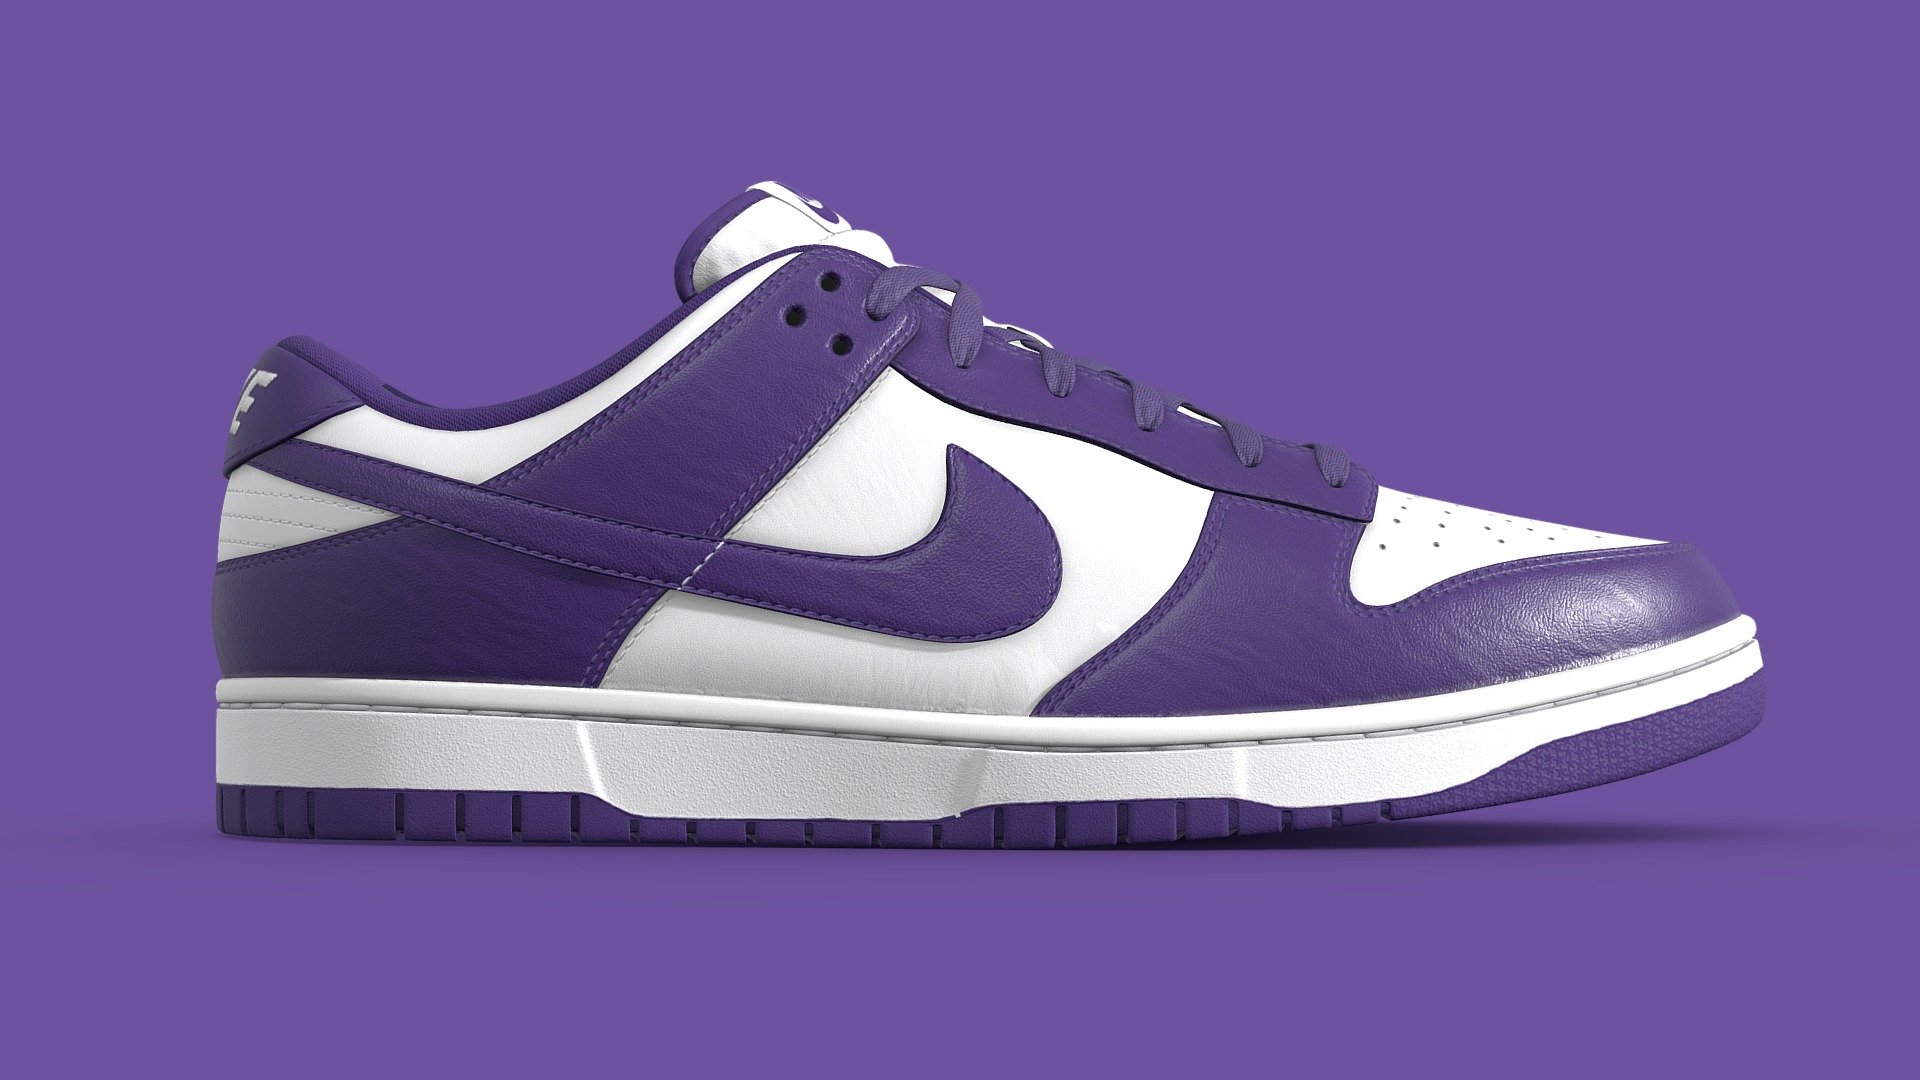 Nike Dunk Low in the Court Purple Colourway. Every detail was made in the recreation of this shoe, from the text on the medial side of the shoe to the subtlety of each material, nothing went overlooked. Stitches were sculpted by hand to achieve the highest quality

What's included


Blender file with linked textures
FBX and OBJ versions
OneMesh version
All 4k textures

Model Features

The upmost care went into crafting this model. As a result it is subdivision ready. The model was unwrapped with efficiency in mind. Both left and right shoes are mostly identical, save for logos and text that cannot be mirrored. As such the high detail version of the shoe uses 4 UV maps to cover both of the shoes, with the One mesh version using just the one UV map 3d model